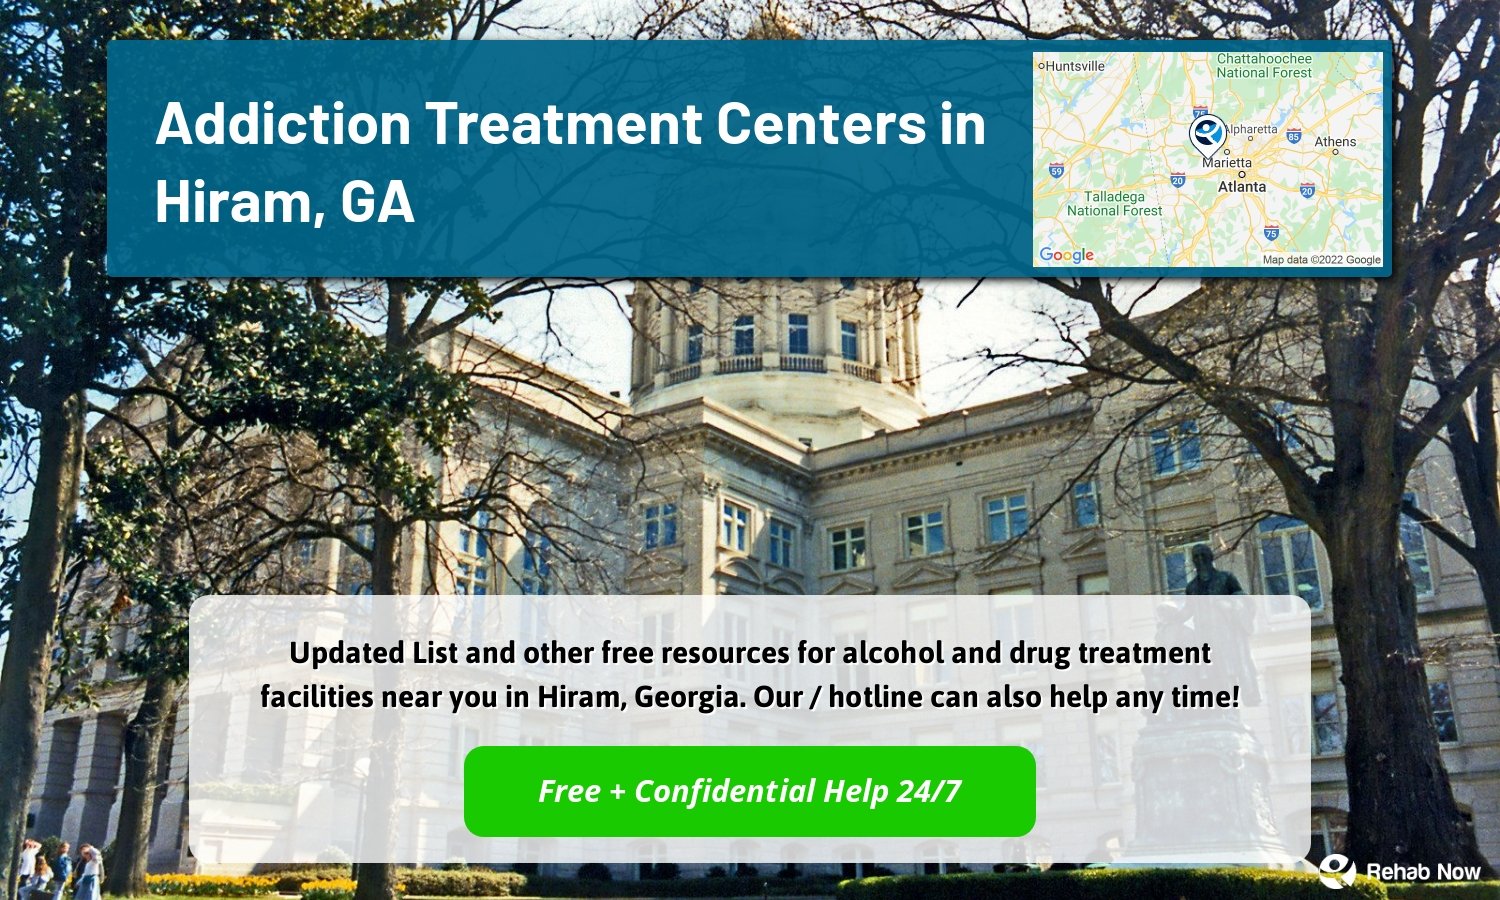  Updated List and other free resources for alcohol and drug treatment facilities near you in Hiram, Georgia. Our / hotline can also help any time!